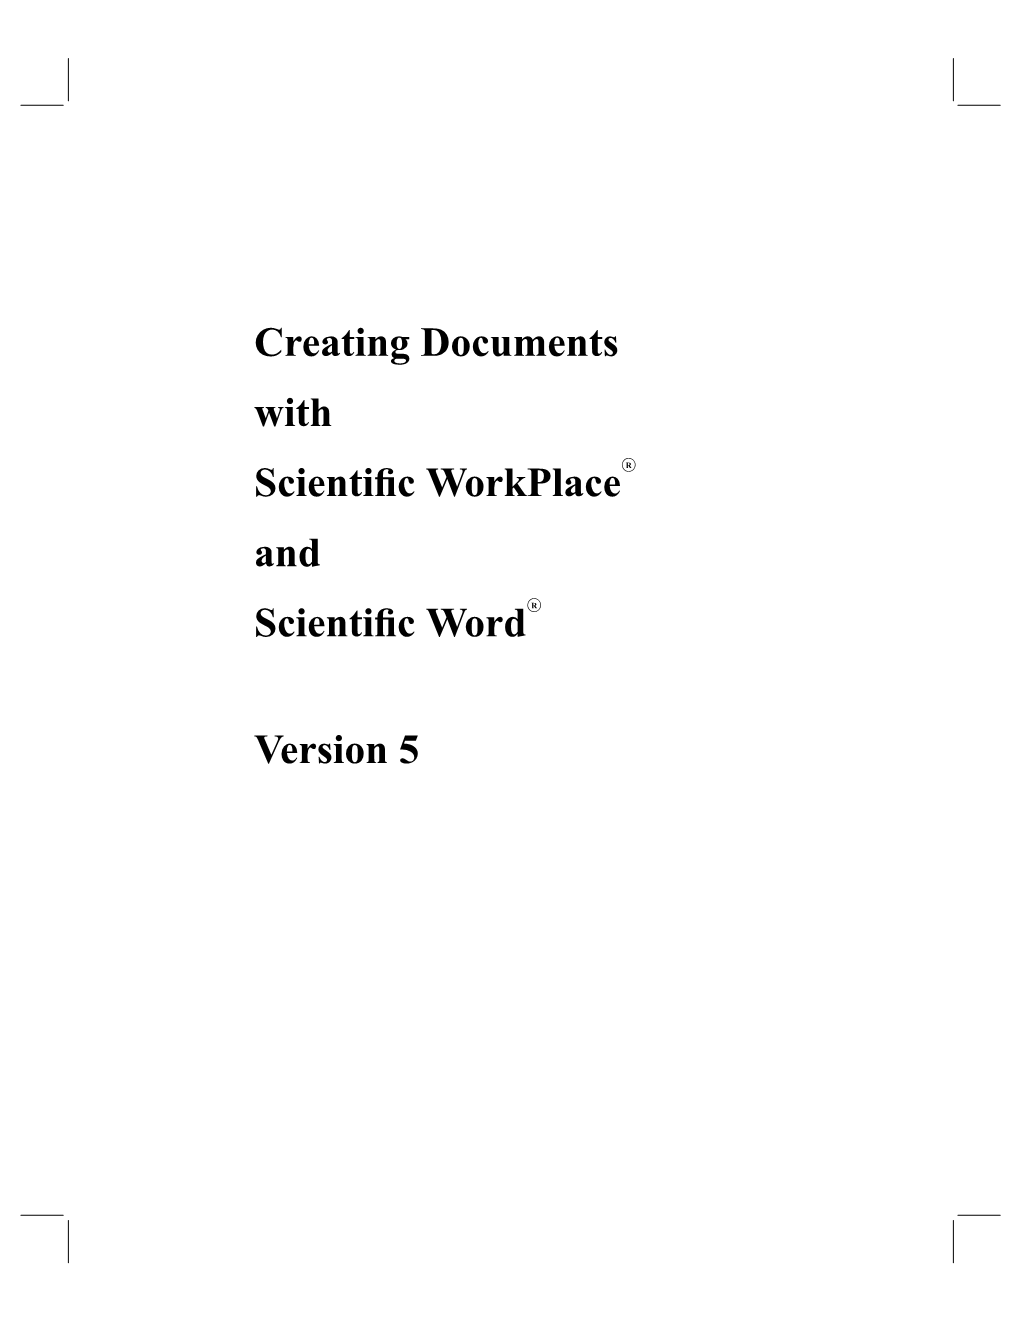 Creating Documents with Scientific Workplacer and Scientific Wordr